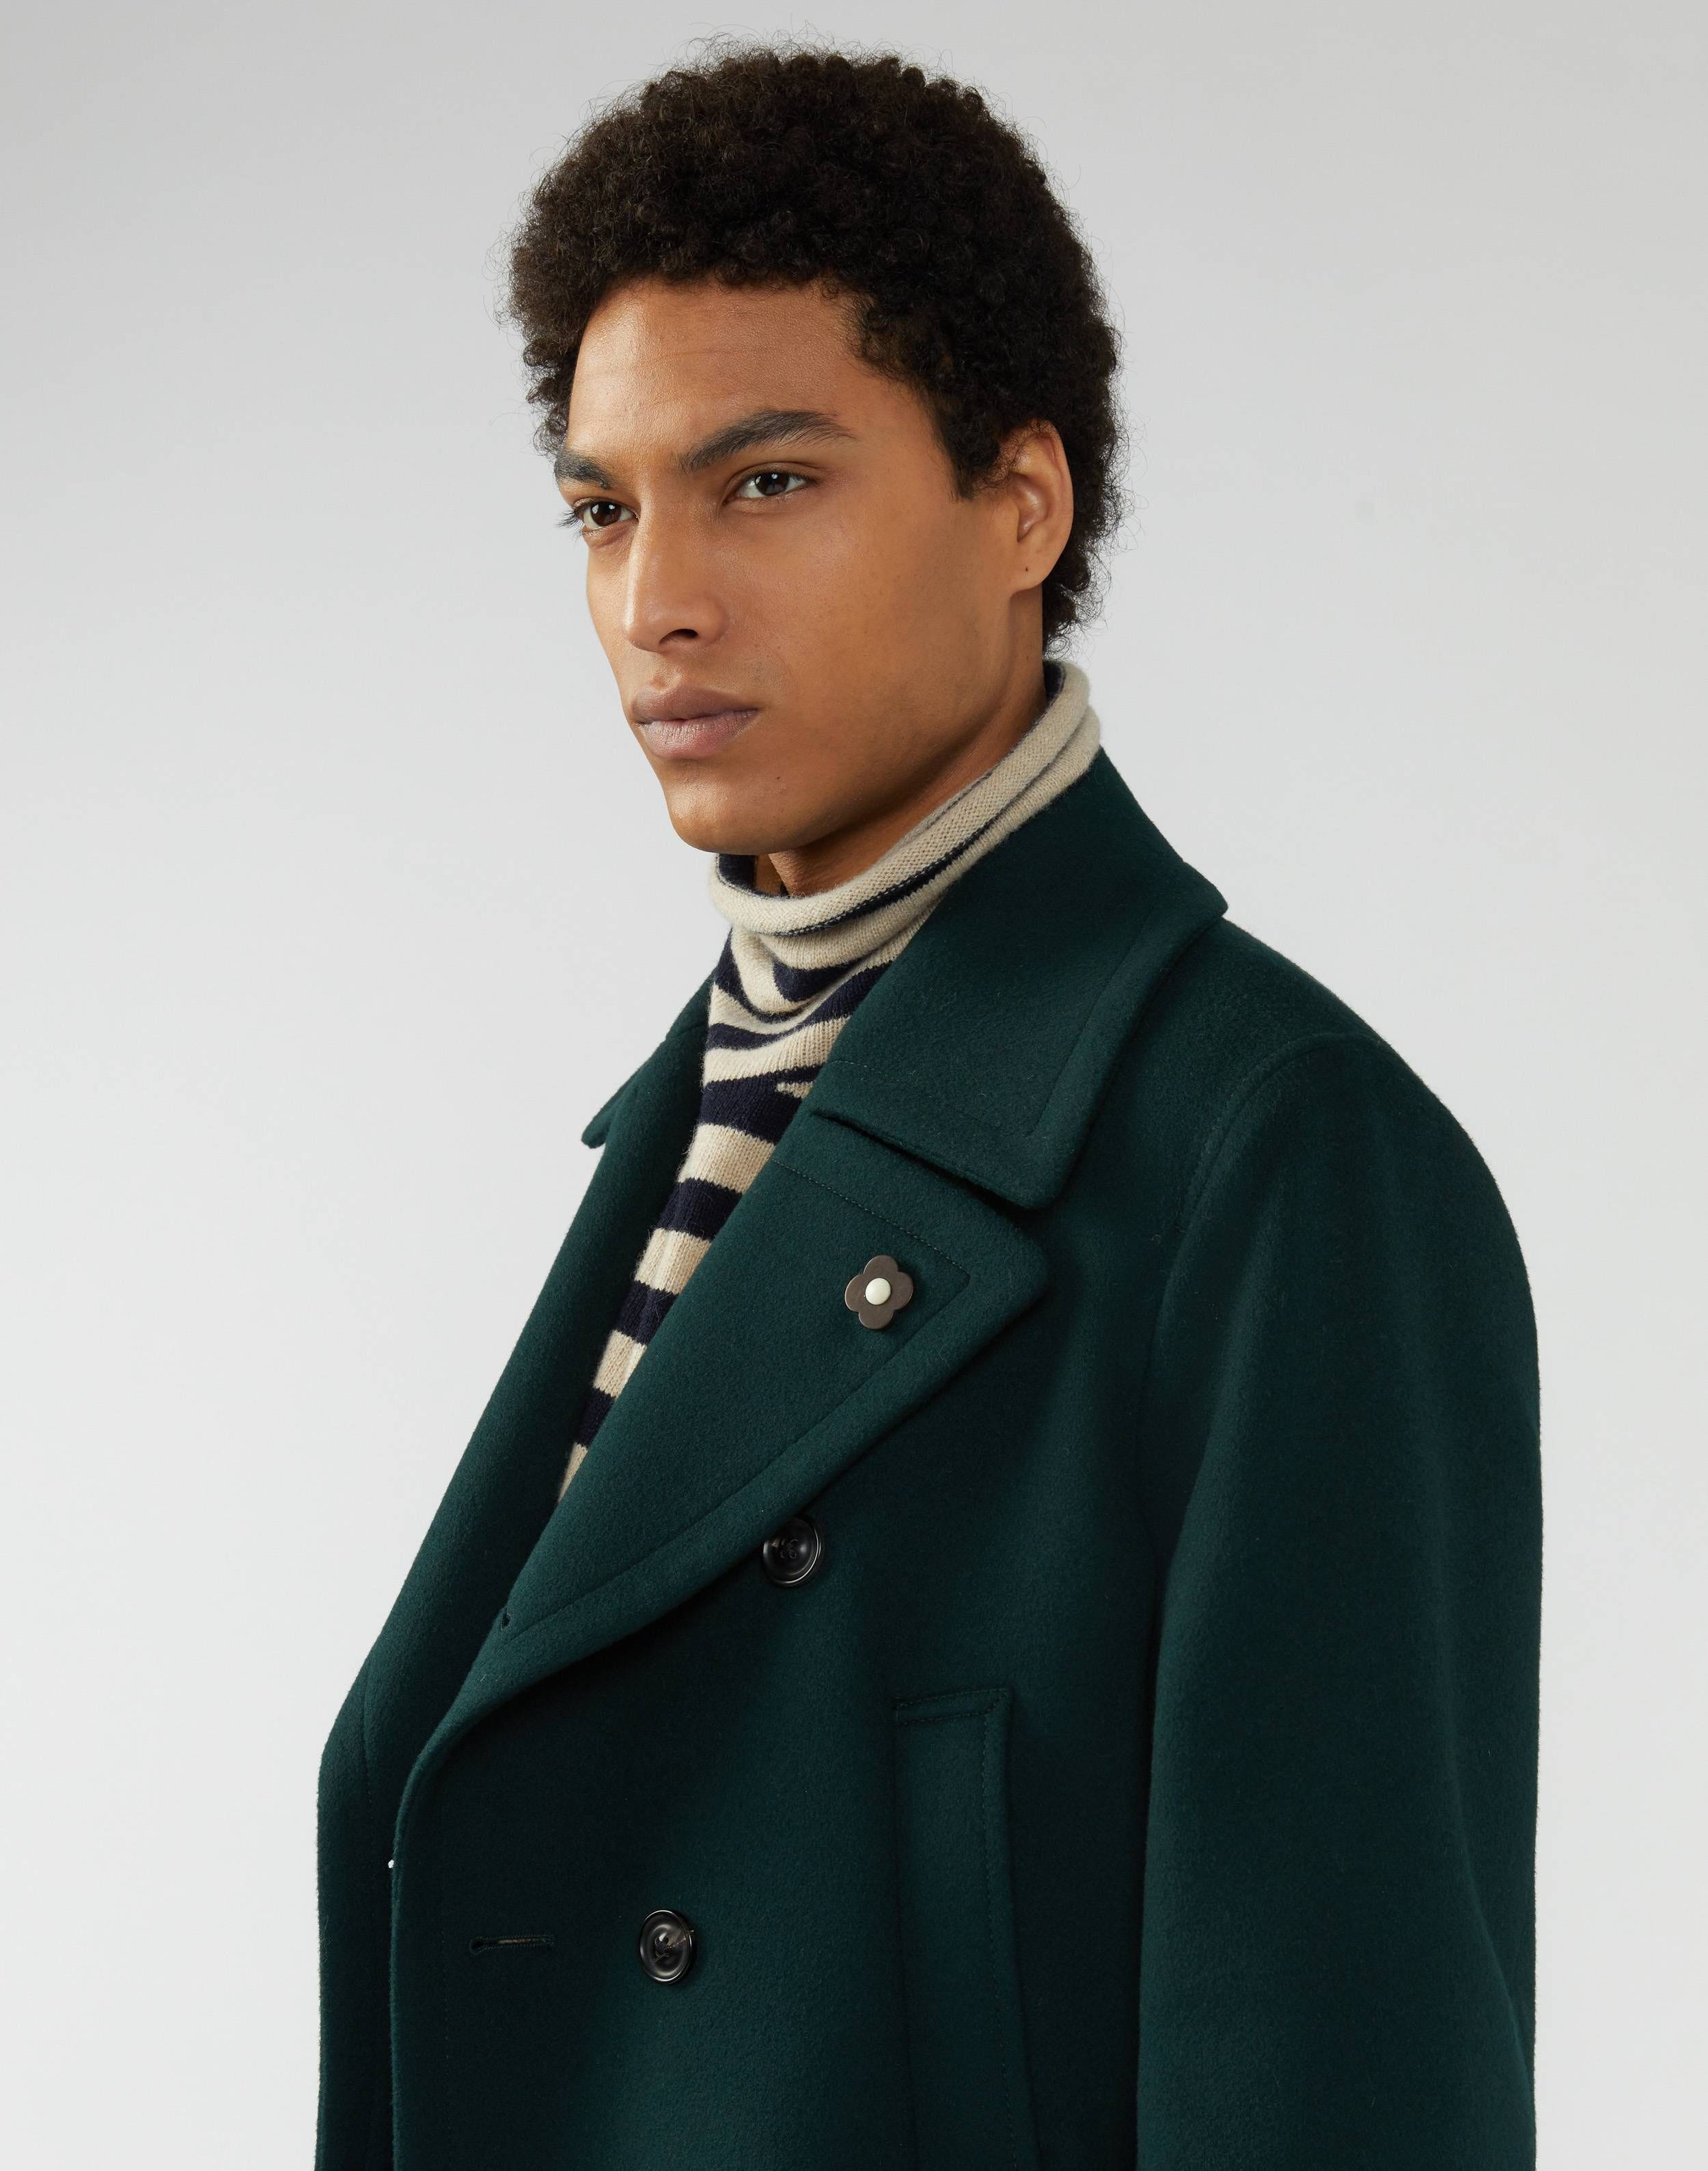 Short double-breasted peacoat in forest-green wool